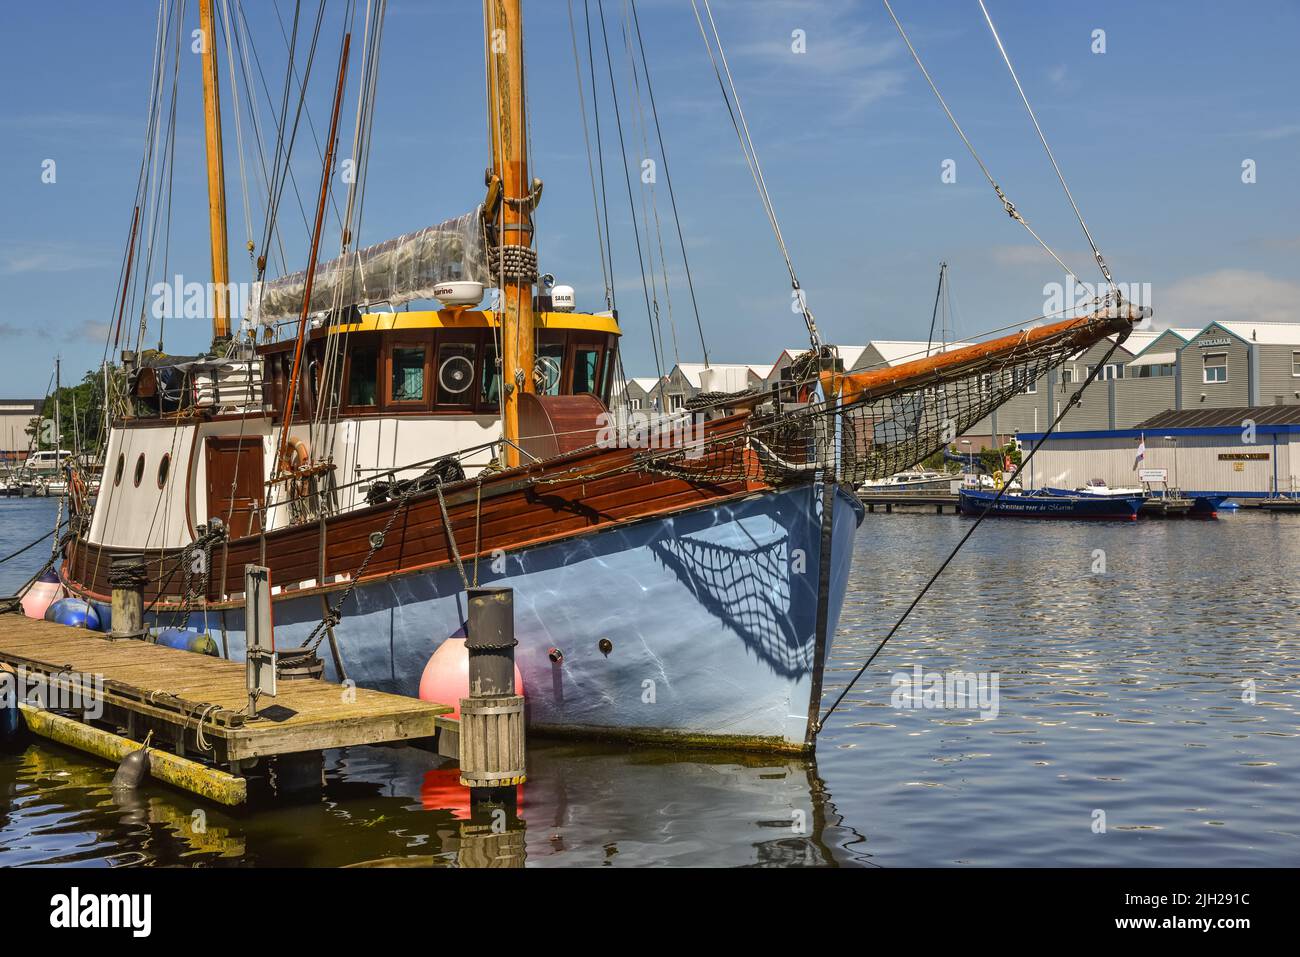 Den Helder, Netherlands. July 2022. An old Fishing trawler in the port of Den Helder. High quality photo Stock Photo